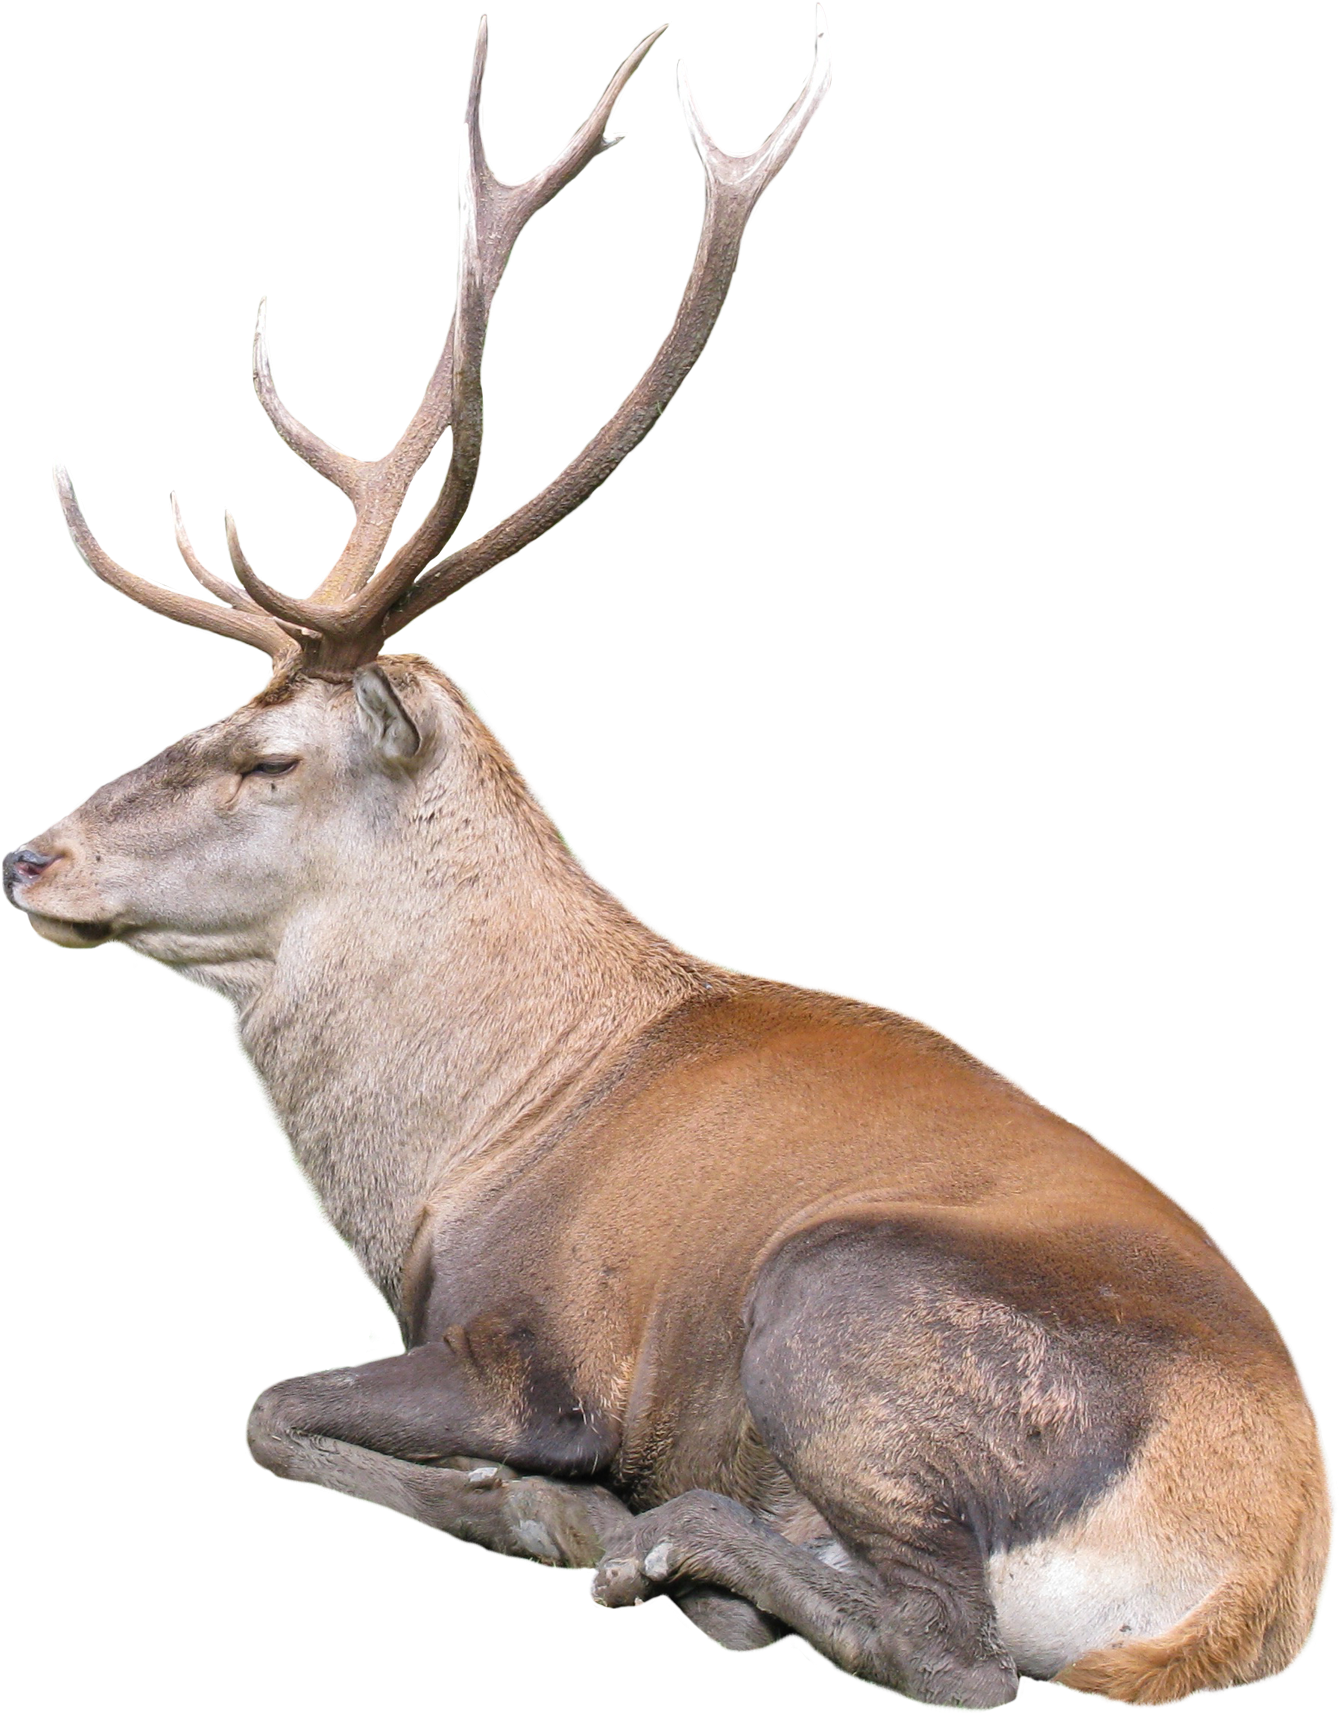 A Deer Lying Down With Antlers